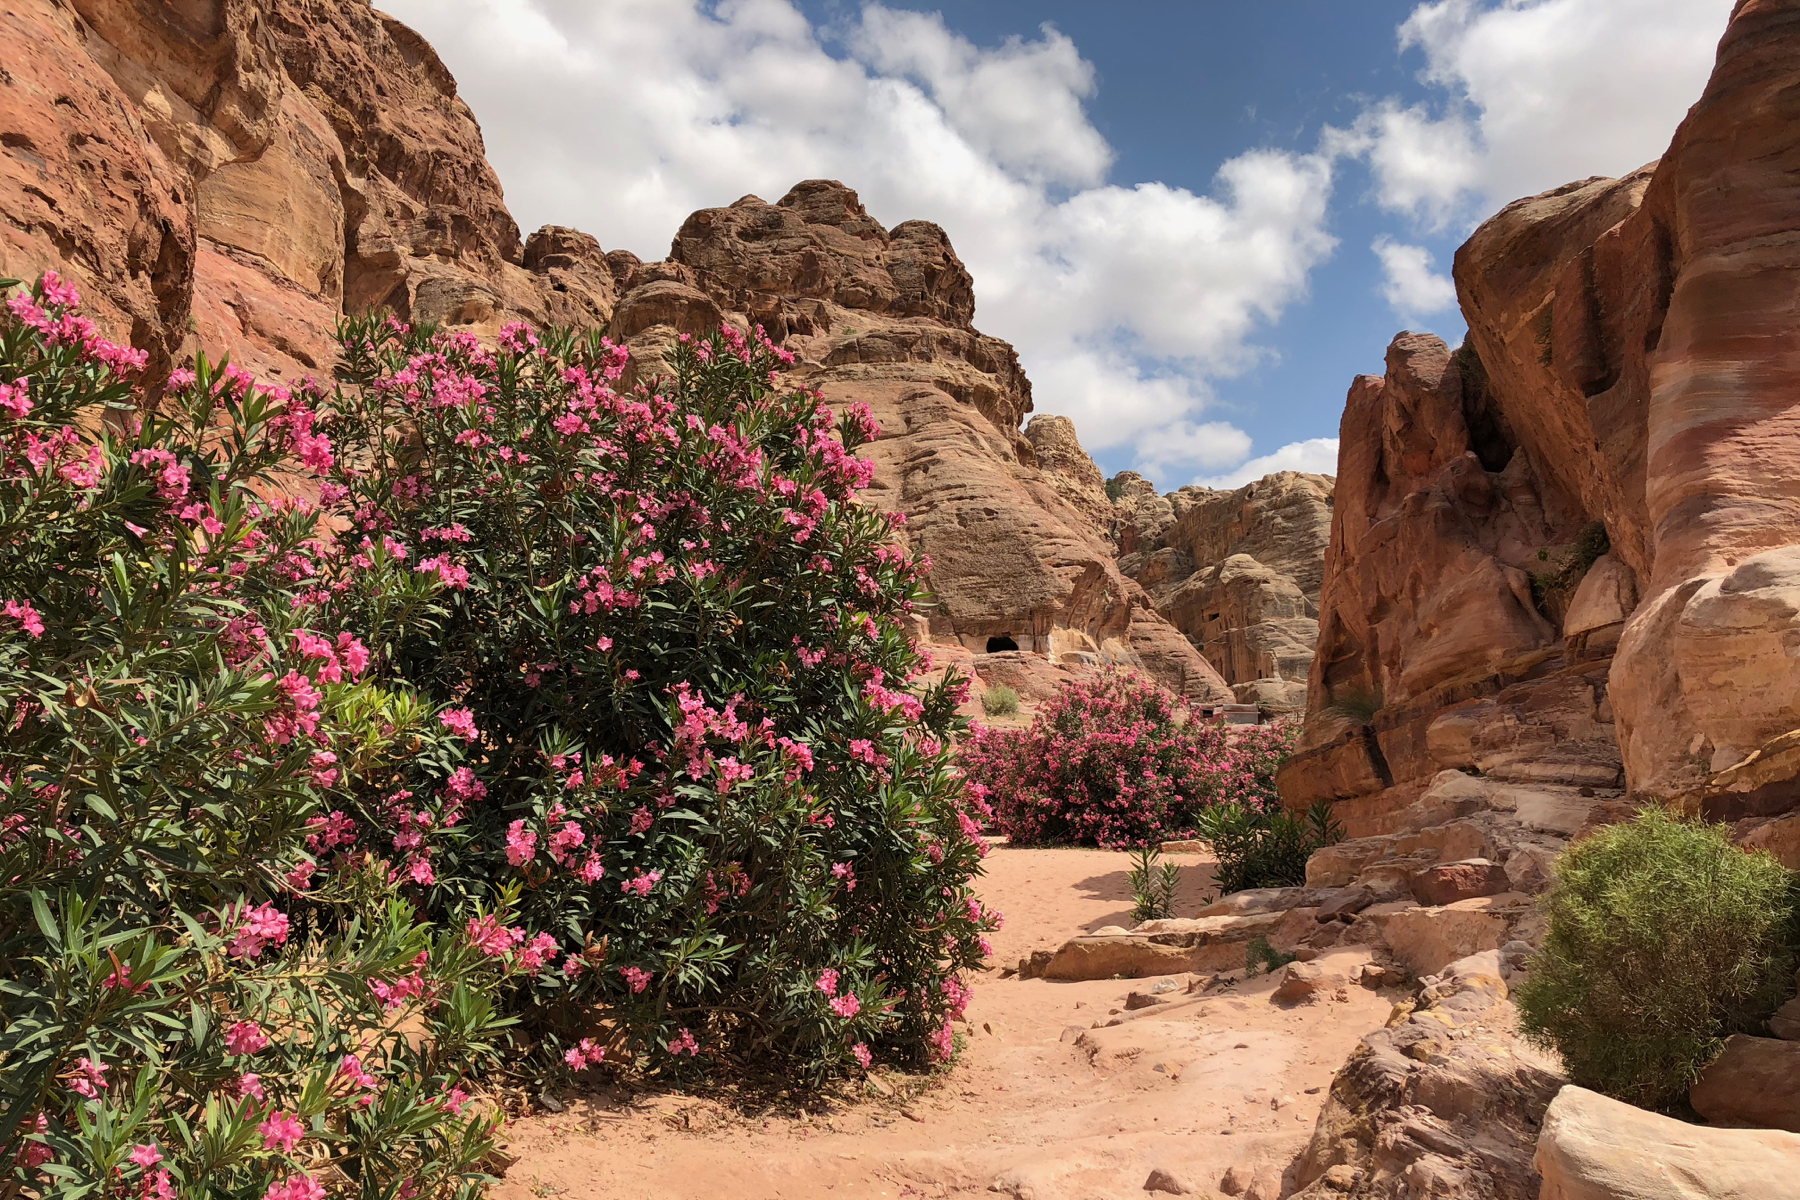 Bushes with pink flowers in a desert landscape along the route of the High Place of Sacrifice Trail in Petra